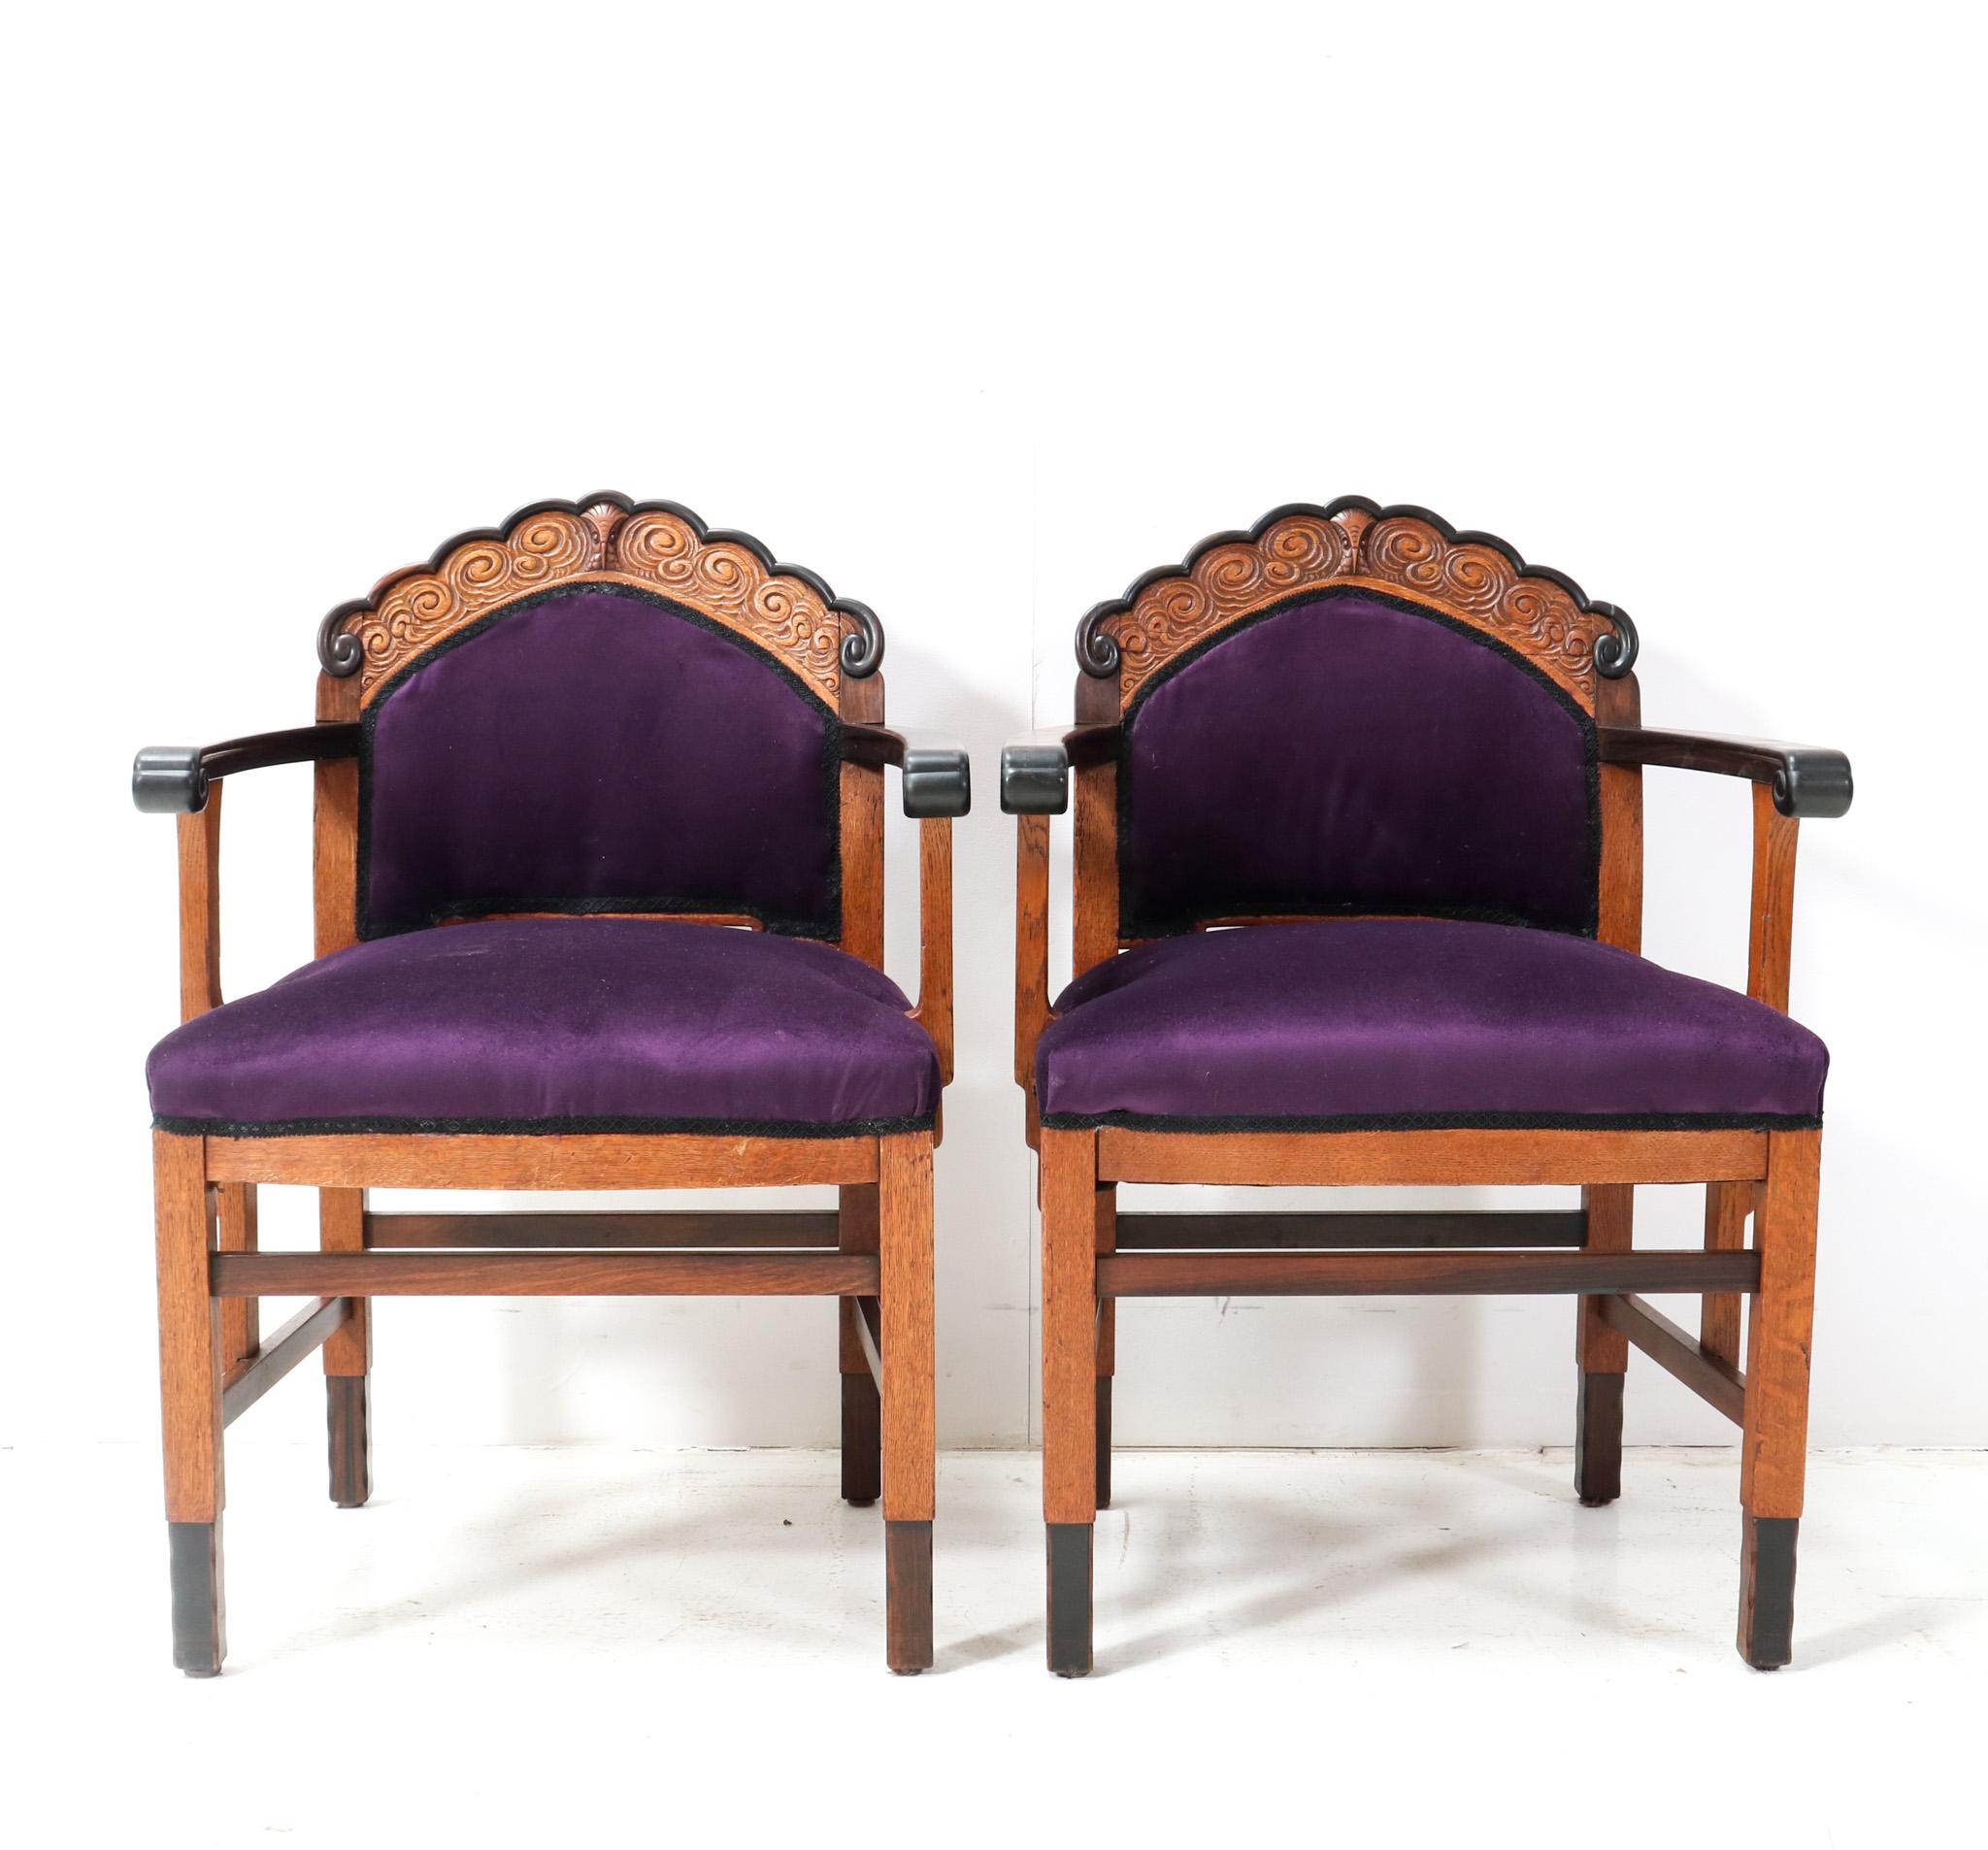 Magnificent and ultra rare set of two Art Deco Amsterdamse School armchairs.
Design by unknown artist but in the manner of the Fa. Drilling Amsterdam.
Striking Dutch design from the 1920s.
Two solid oak frames with solid macassar ebony armrests and